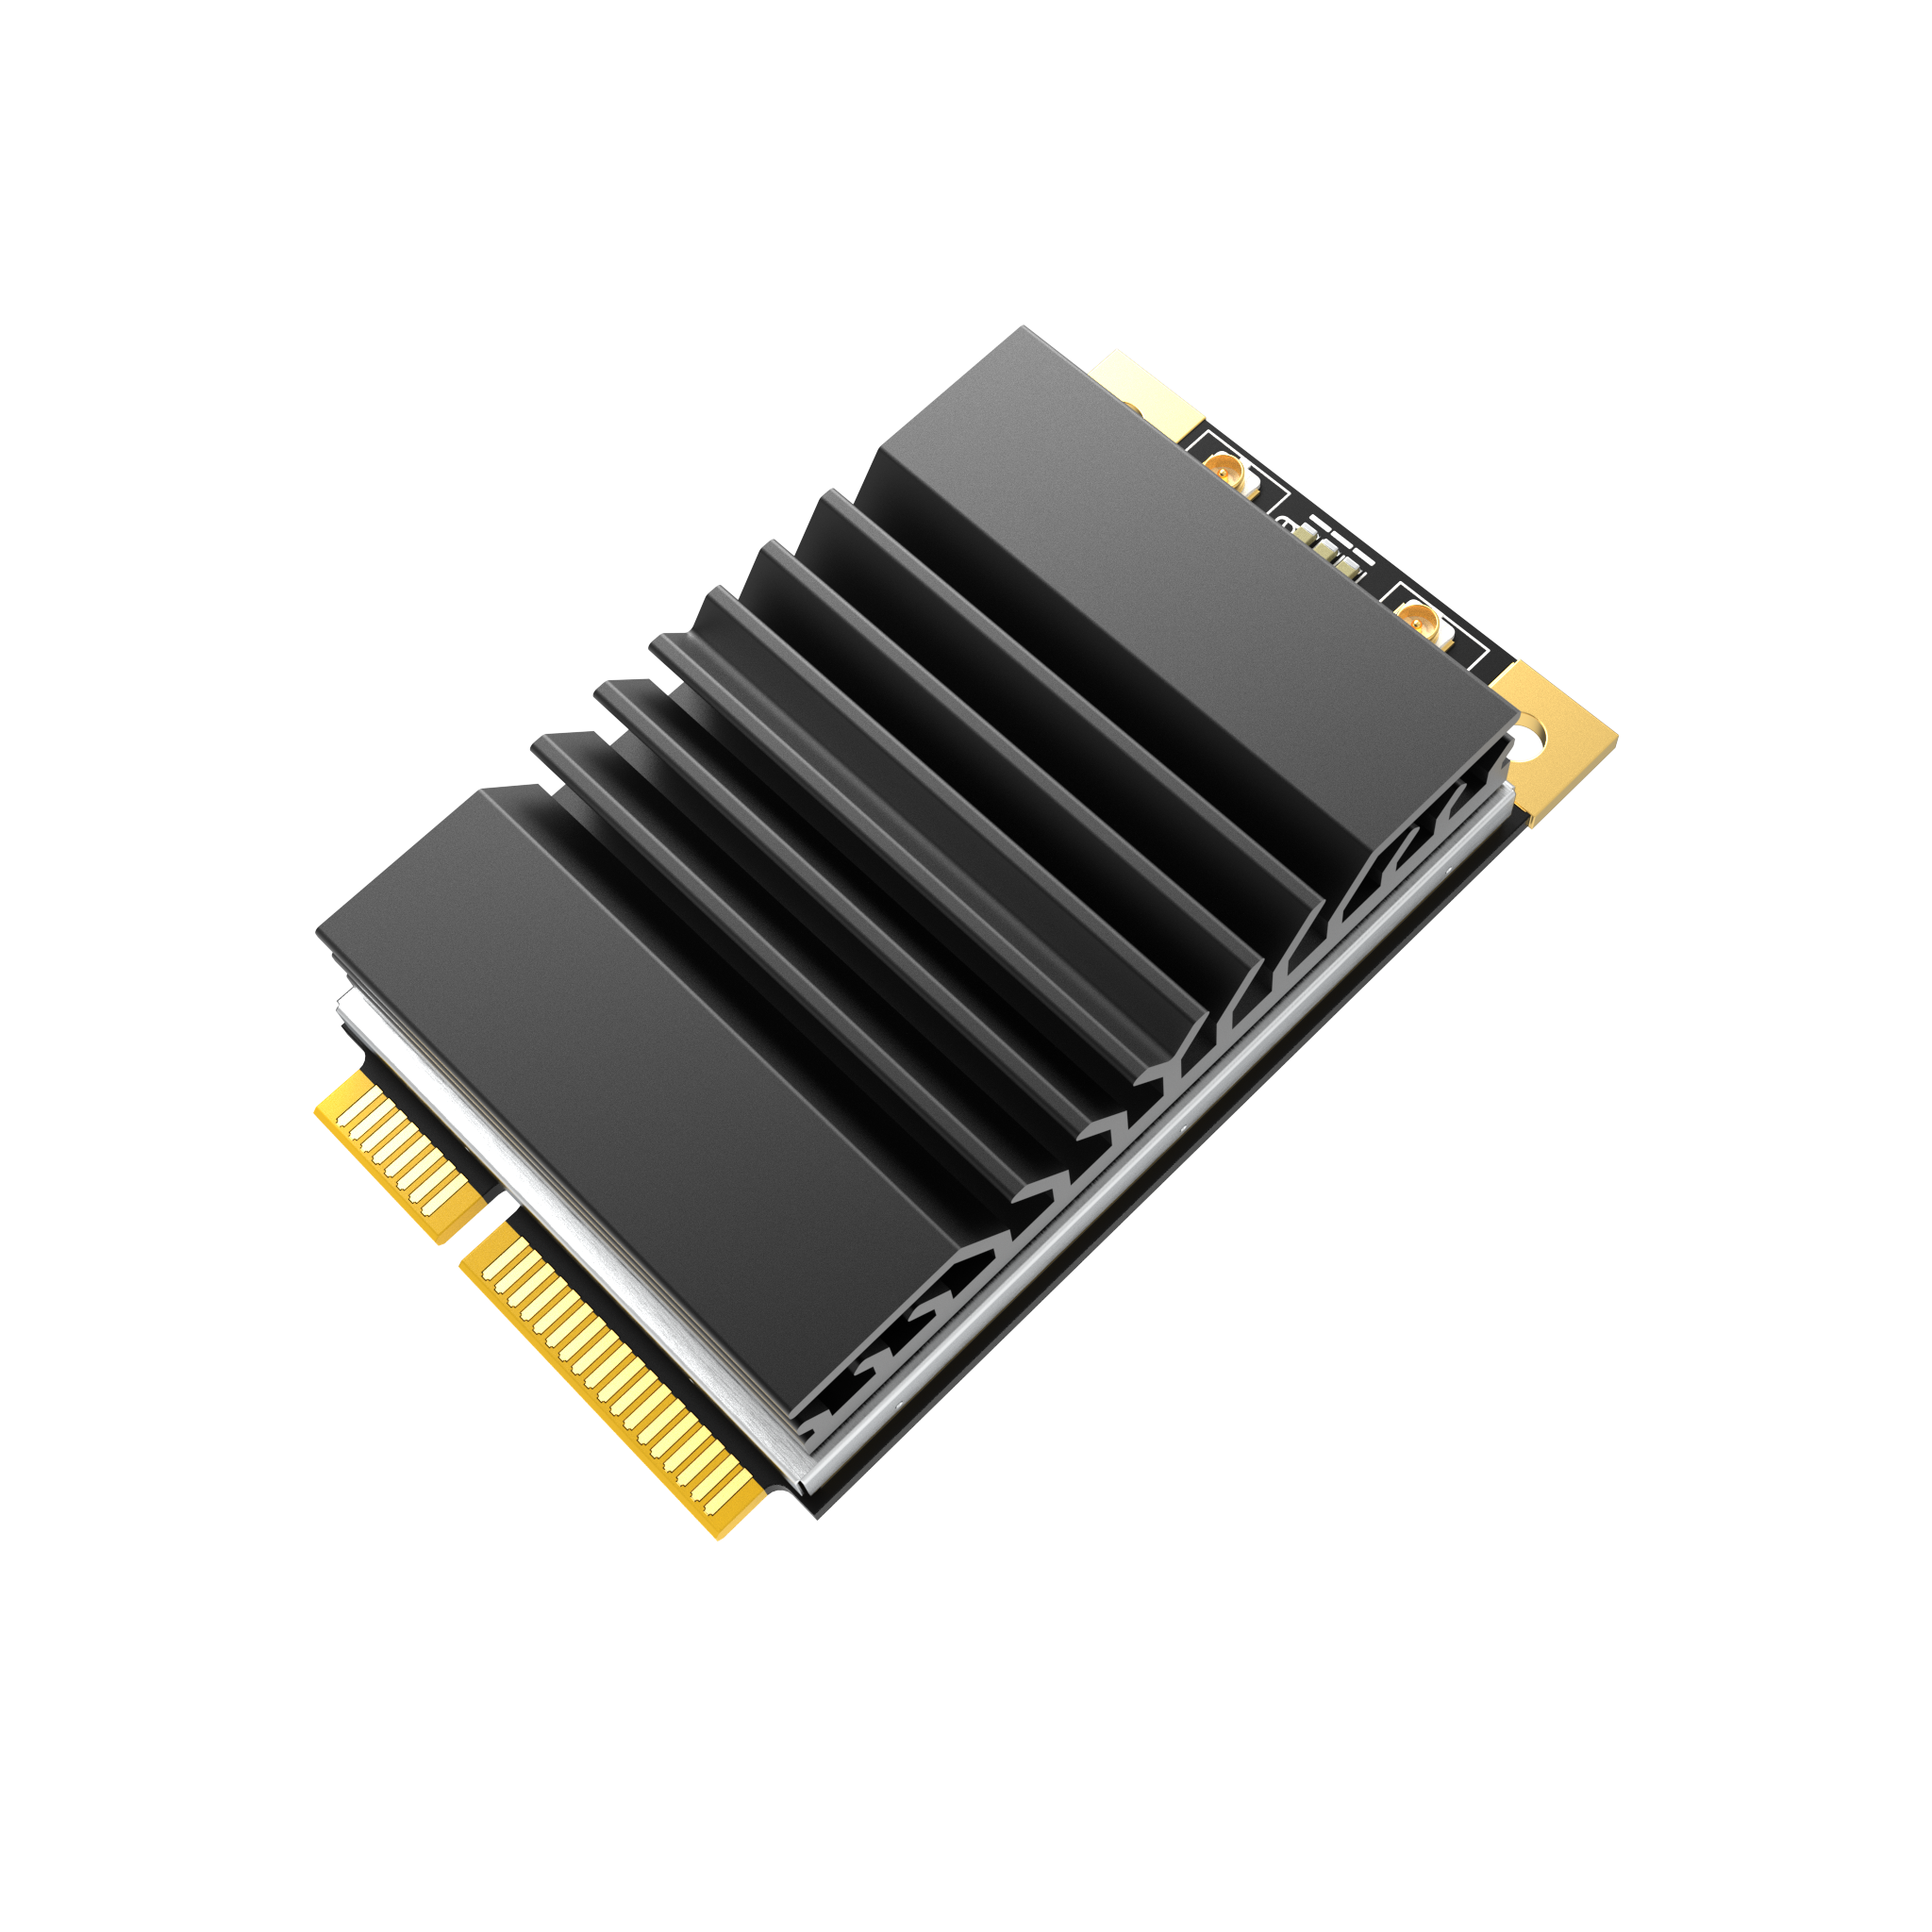 2.4 GHz mini PCIe Concentrator Module for LoRa Based on SX1280 | RAK5148